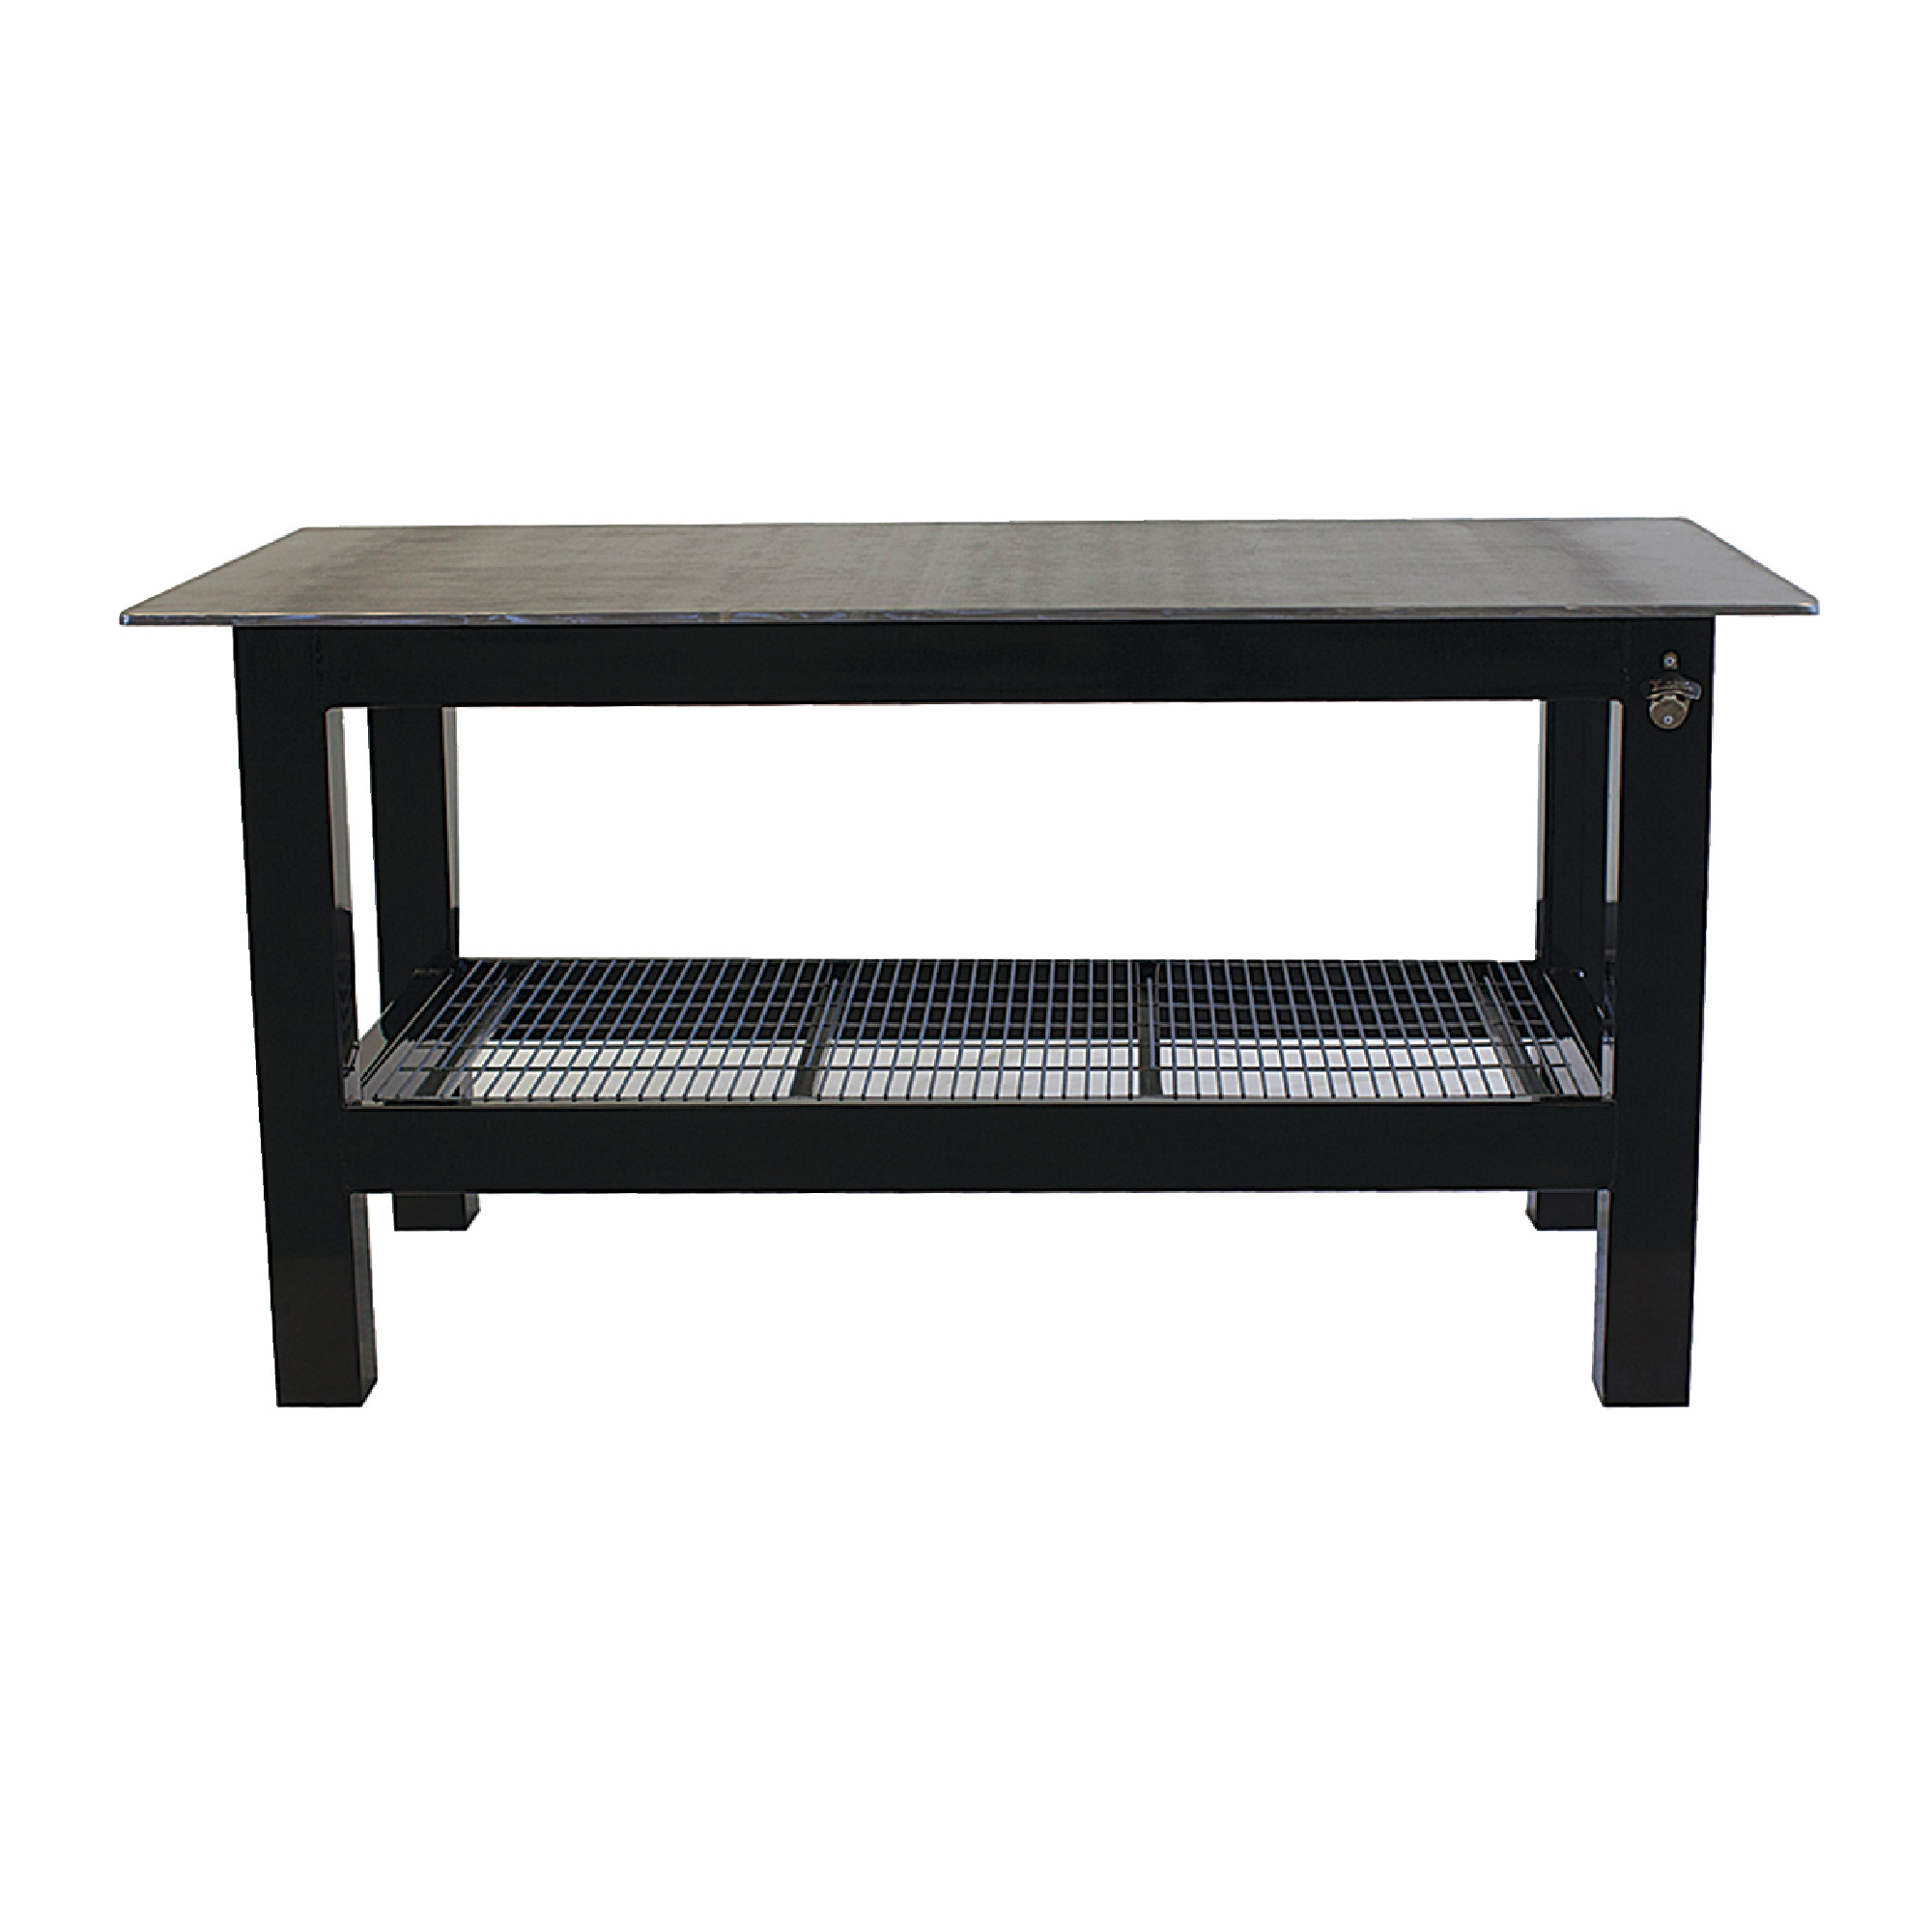 Welding Table With 1/2" Plate Steel Top